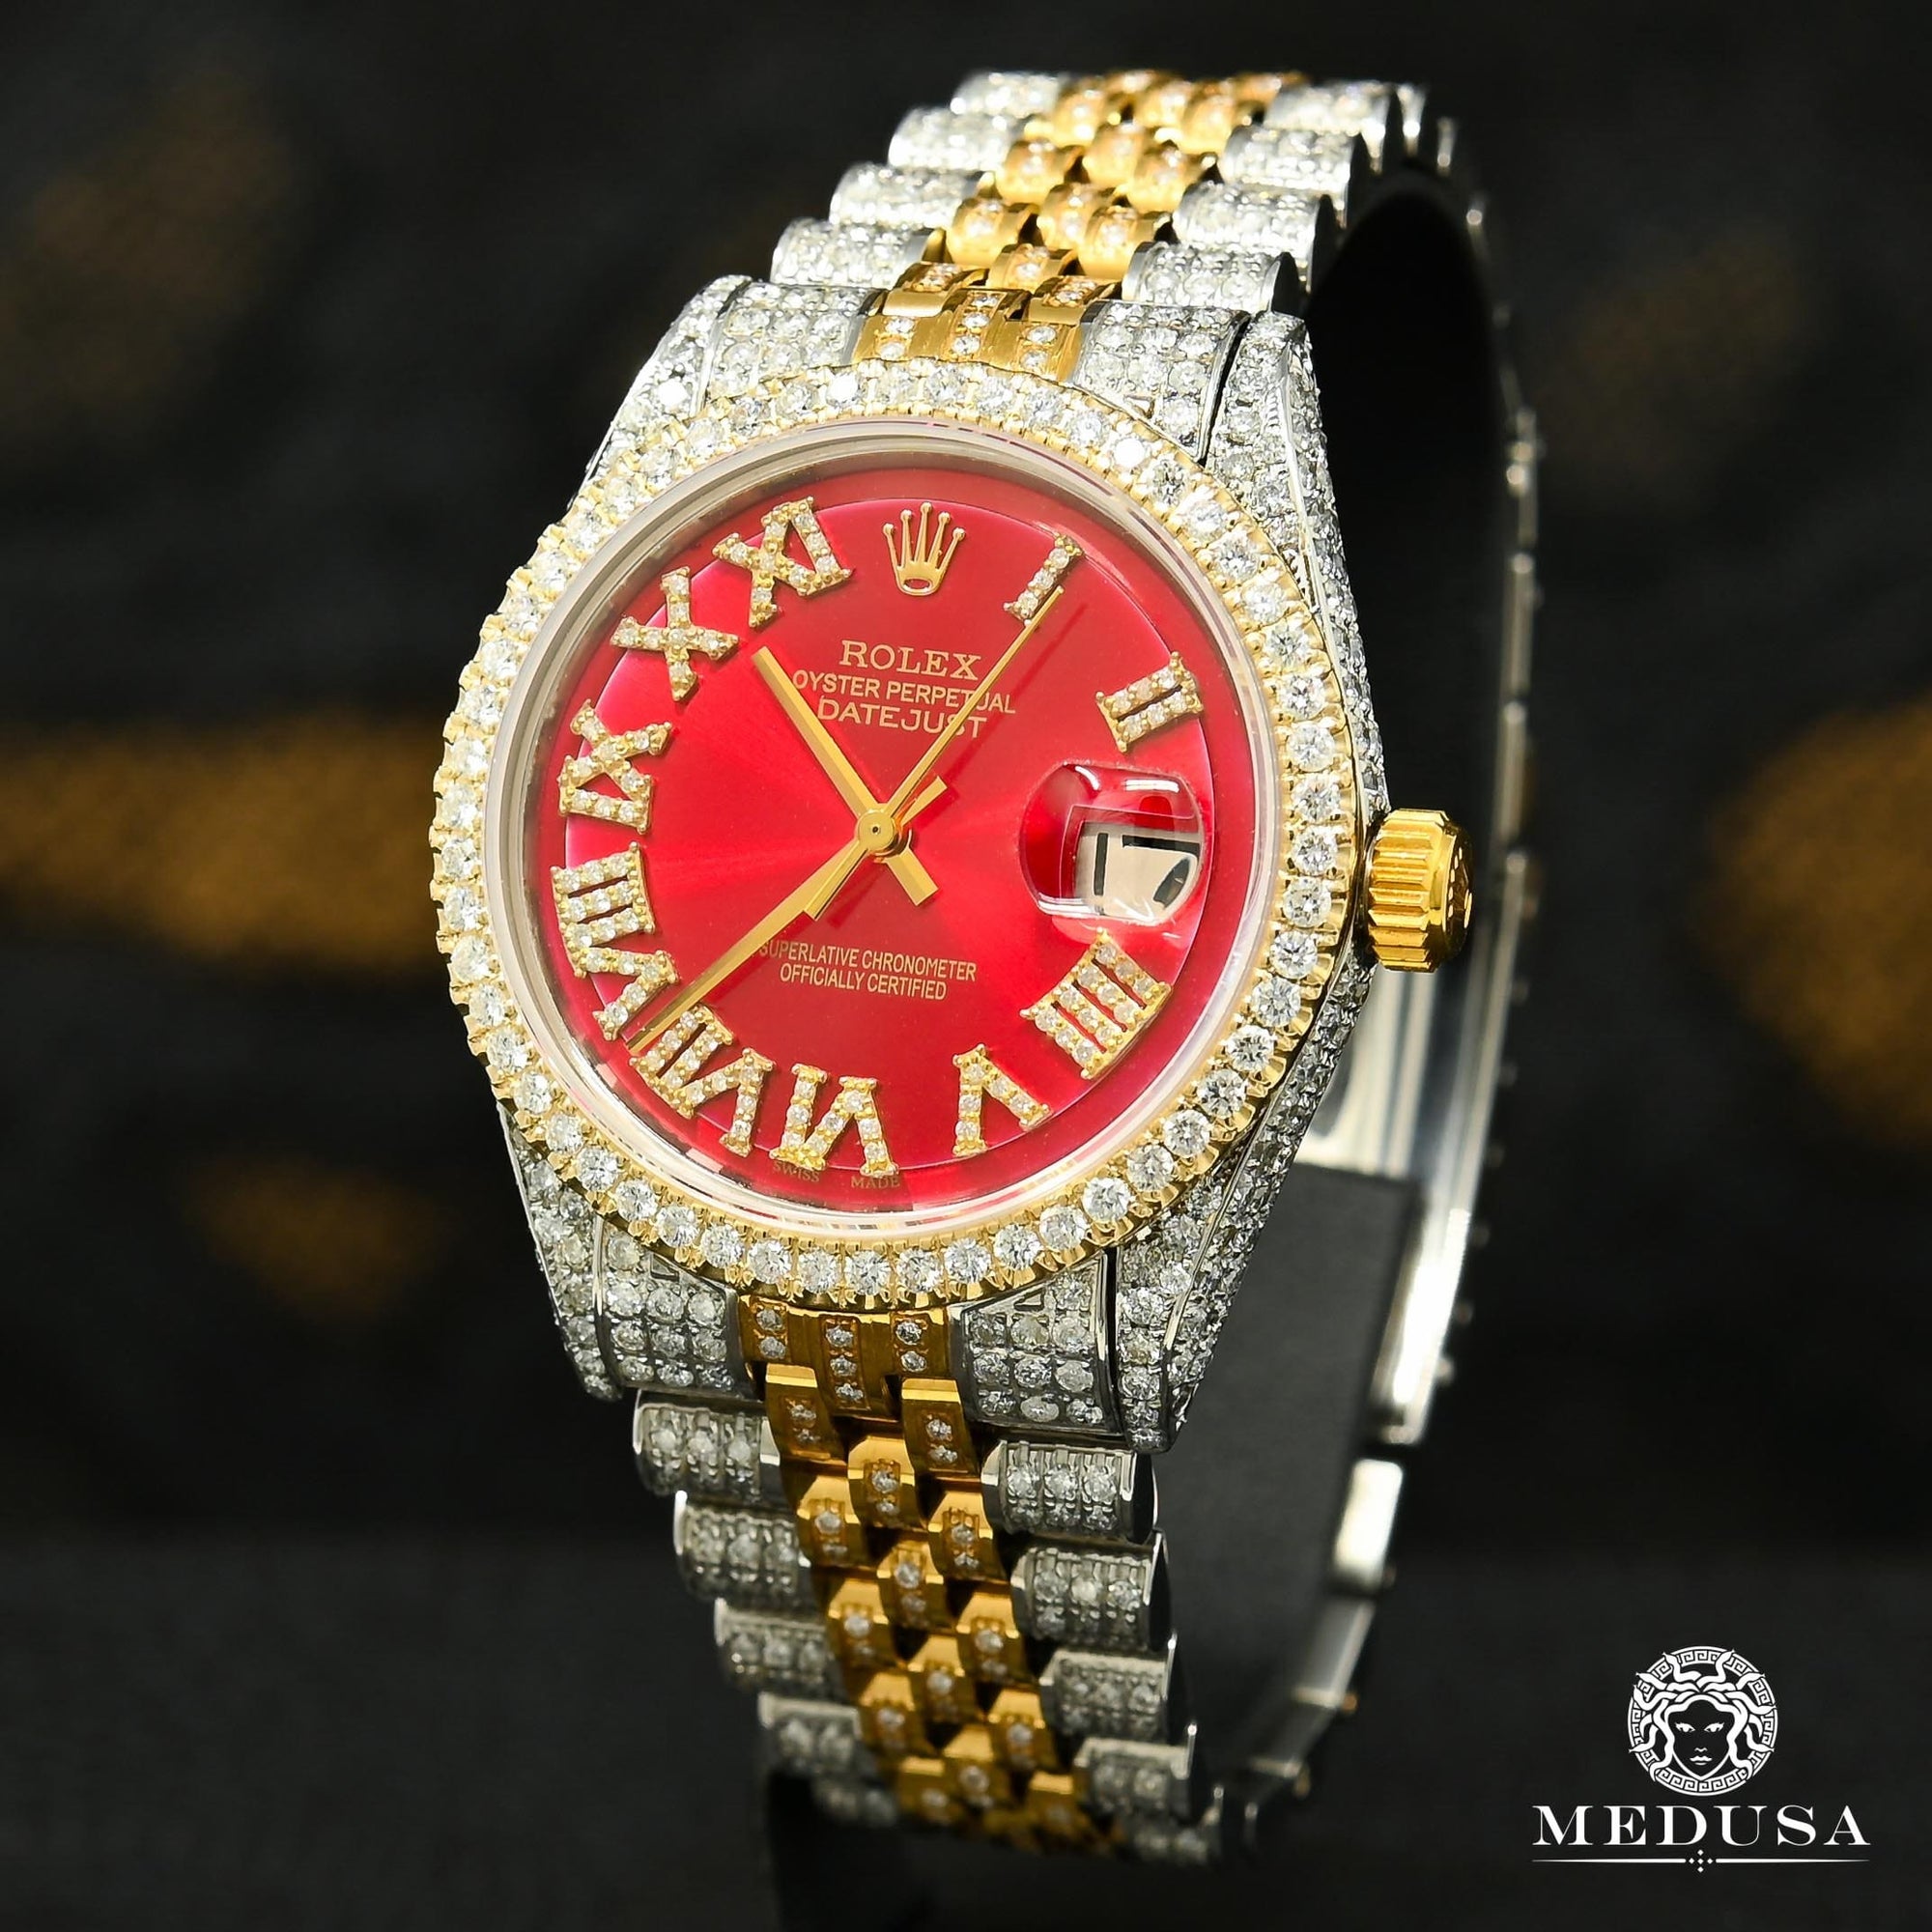 Rolex Watches | Collection of Certified Rolex Watches | Medusa jewelry